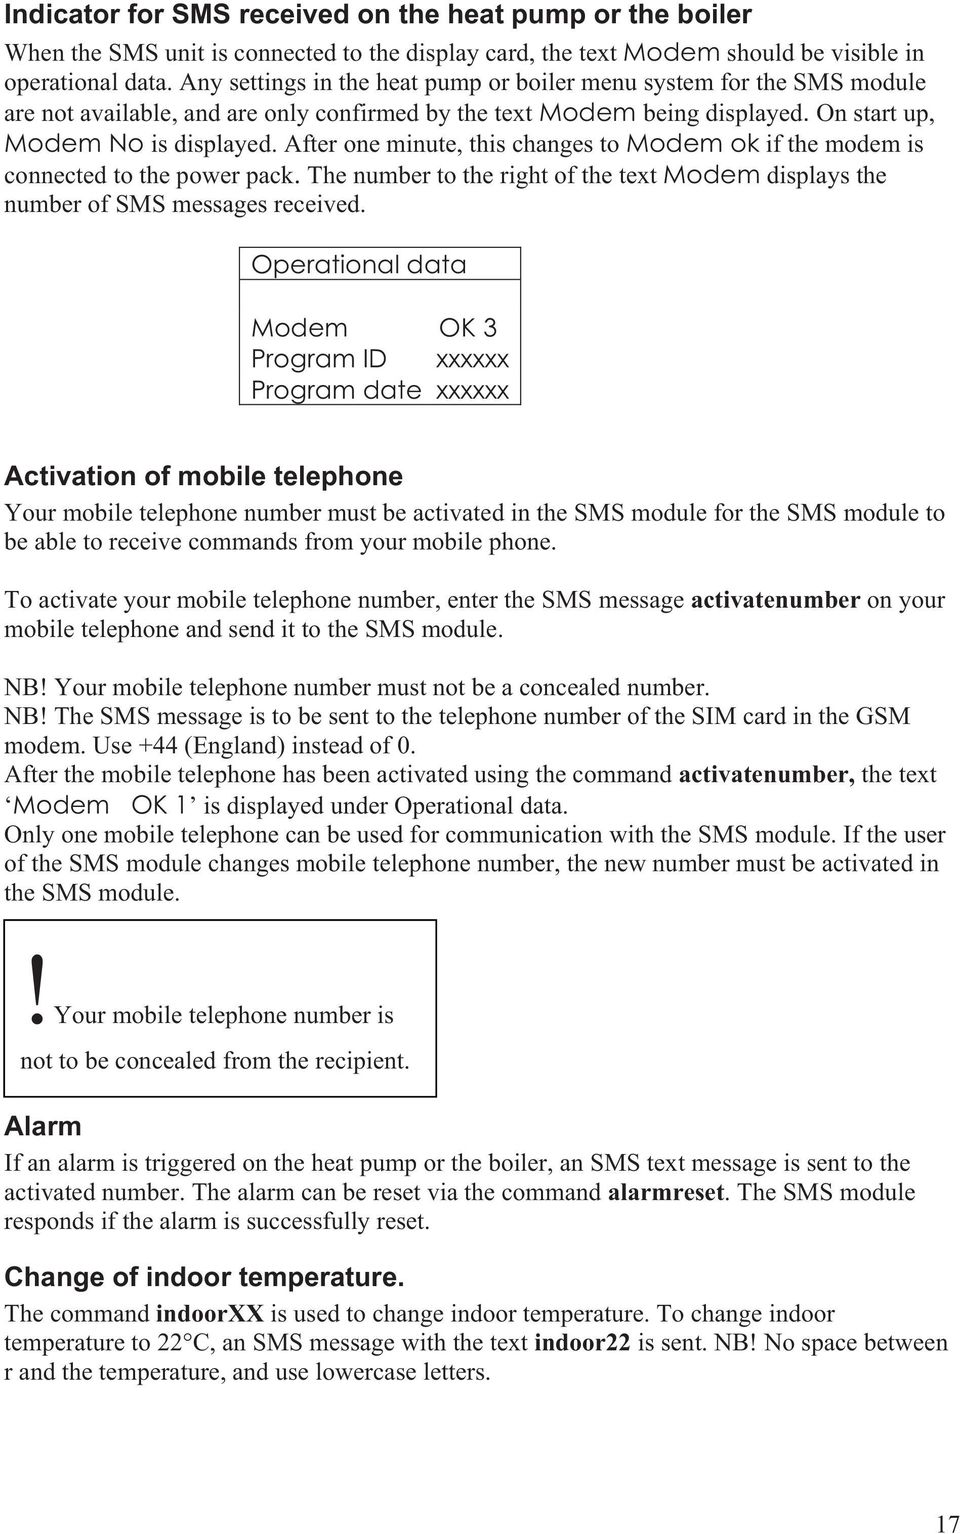 After one minute, this changes to Modem ok if the modem is connected to the power pack. The number to the right of the text Modem displays the number of SMS messages received.